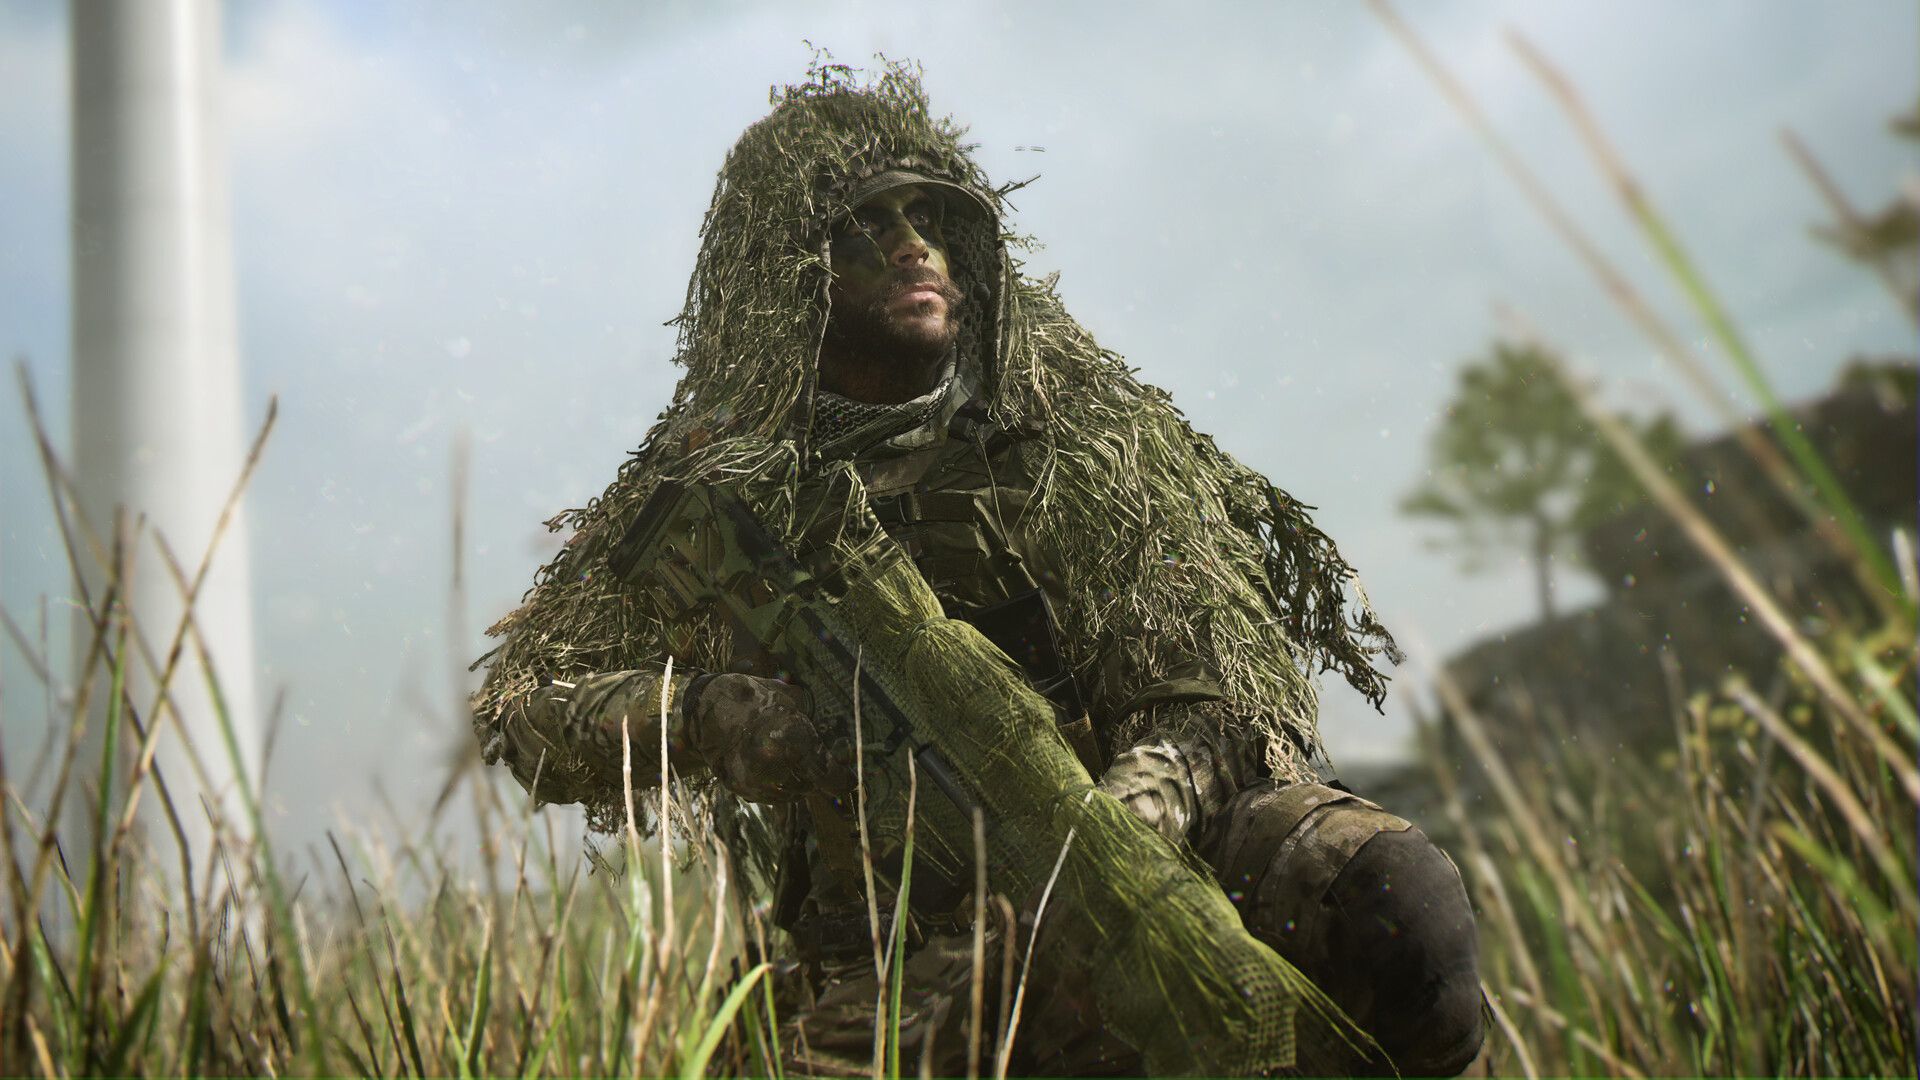 In this article, we are going to explain the Modern Warfare 2 campaign ending, so you can understand every aspect of the newest Call of Duty title.